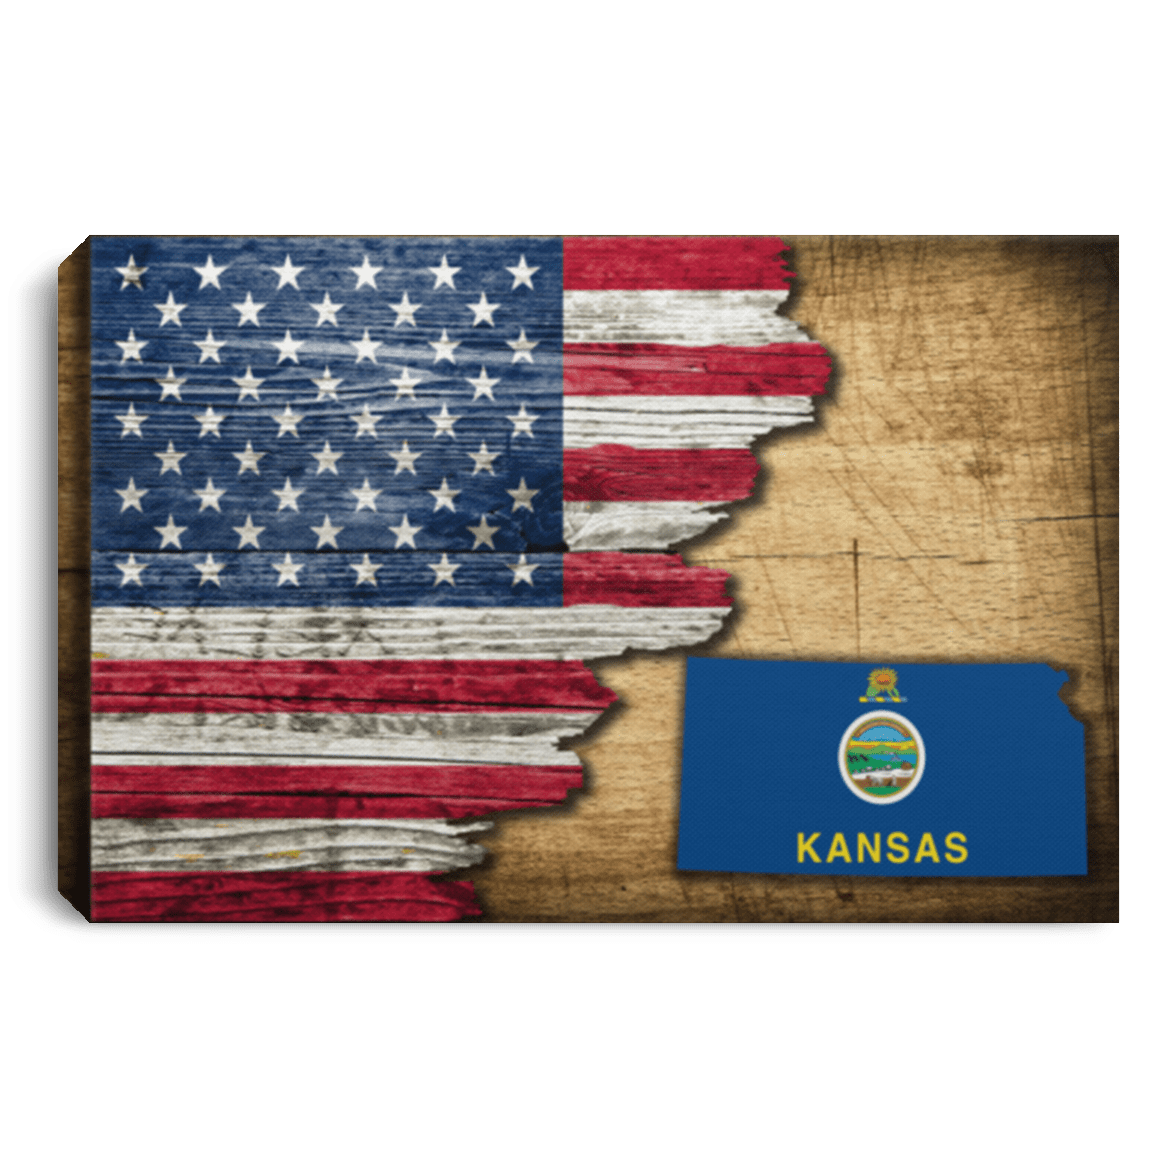 United States/Kansas Flag Ripped Effect 12X8 Inches Landscape Canvas .75In Frame